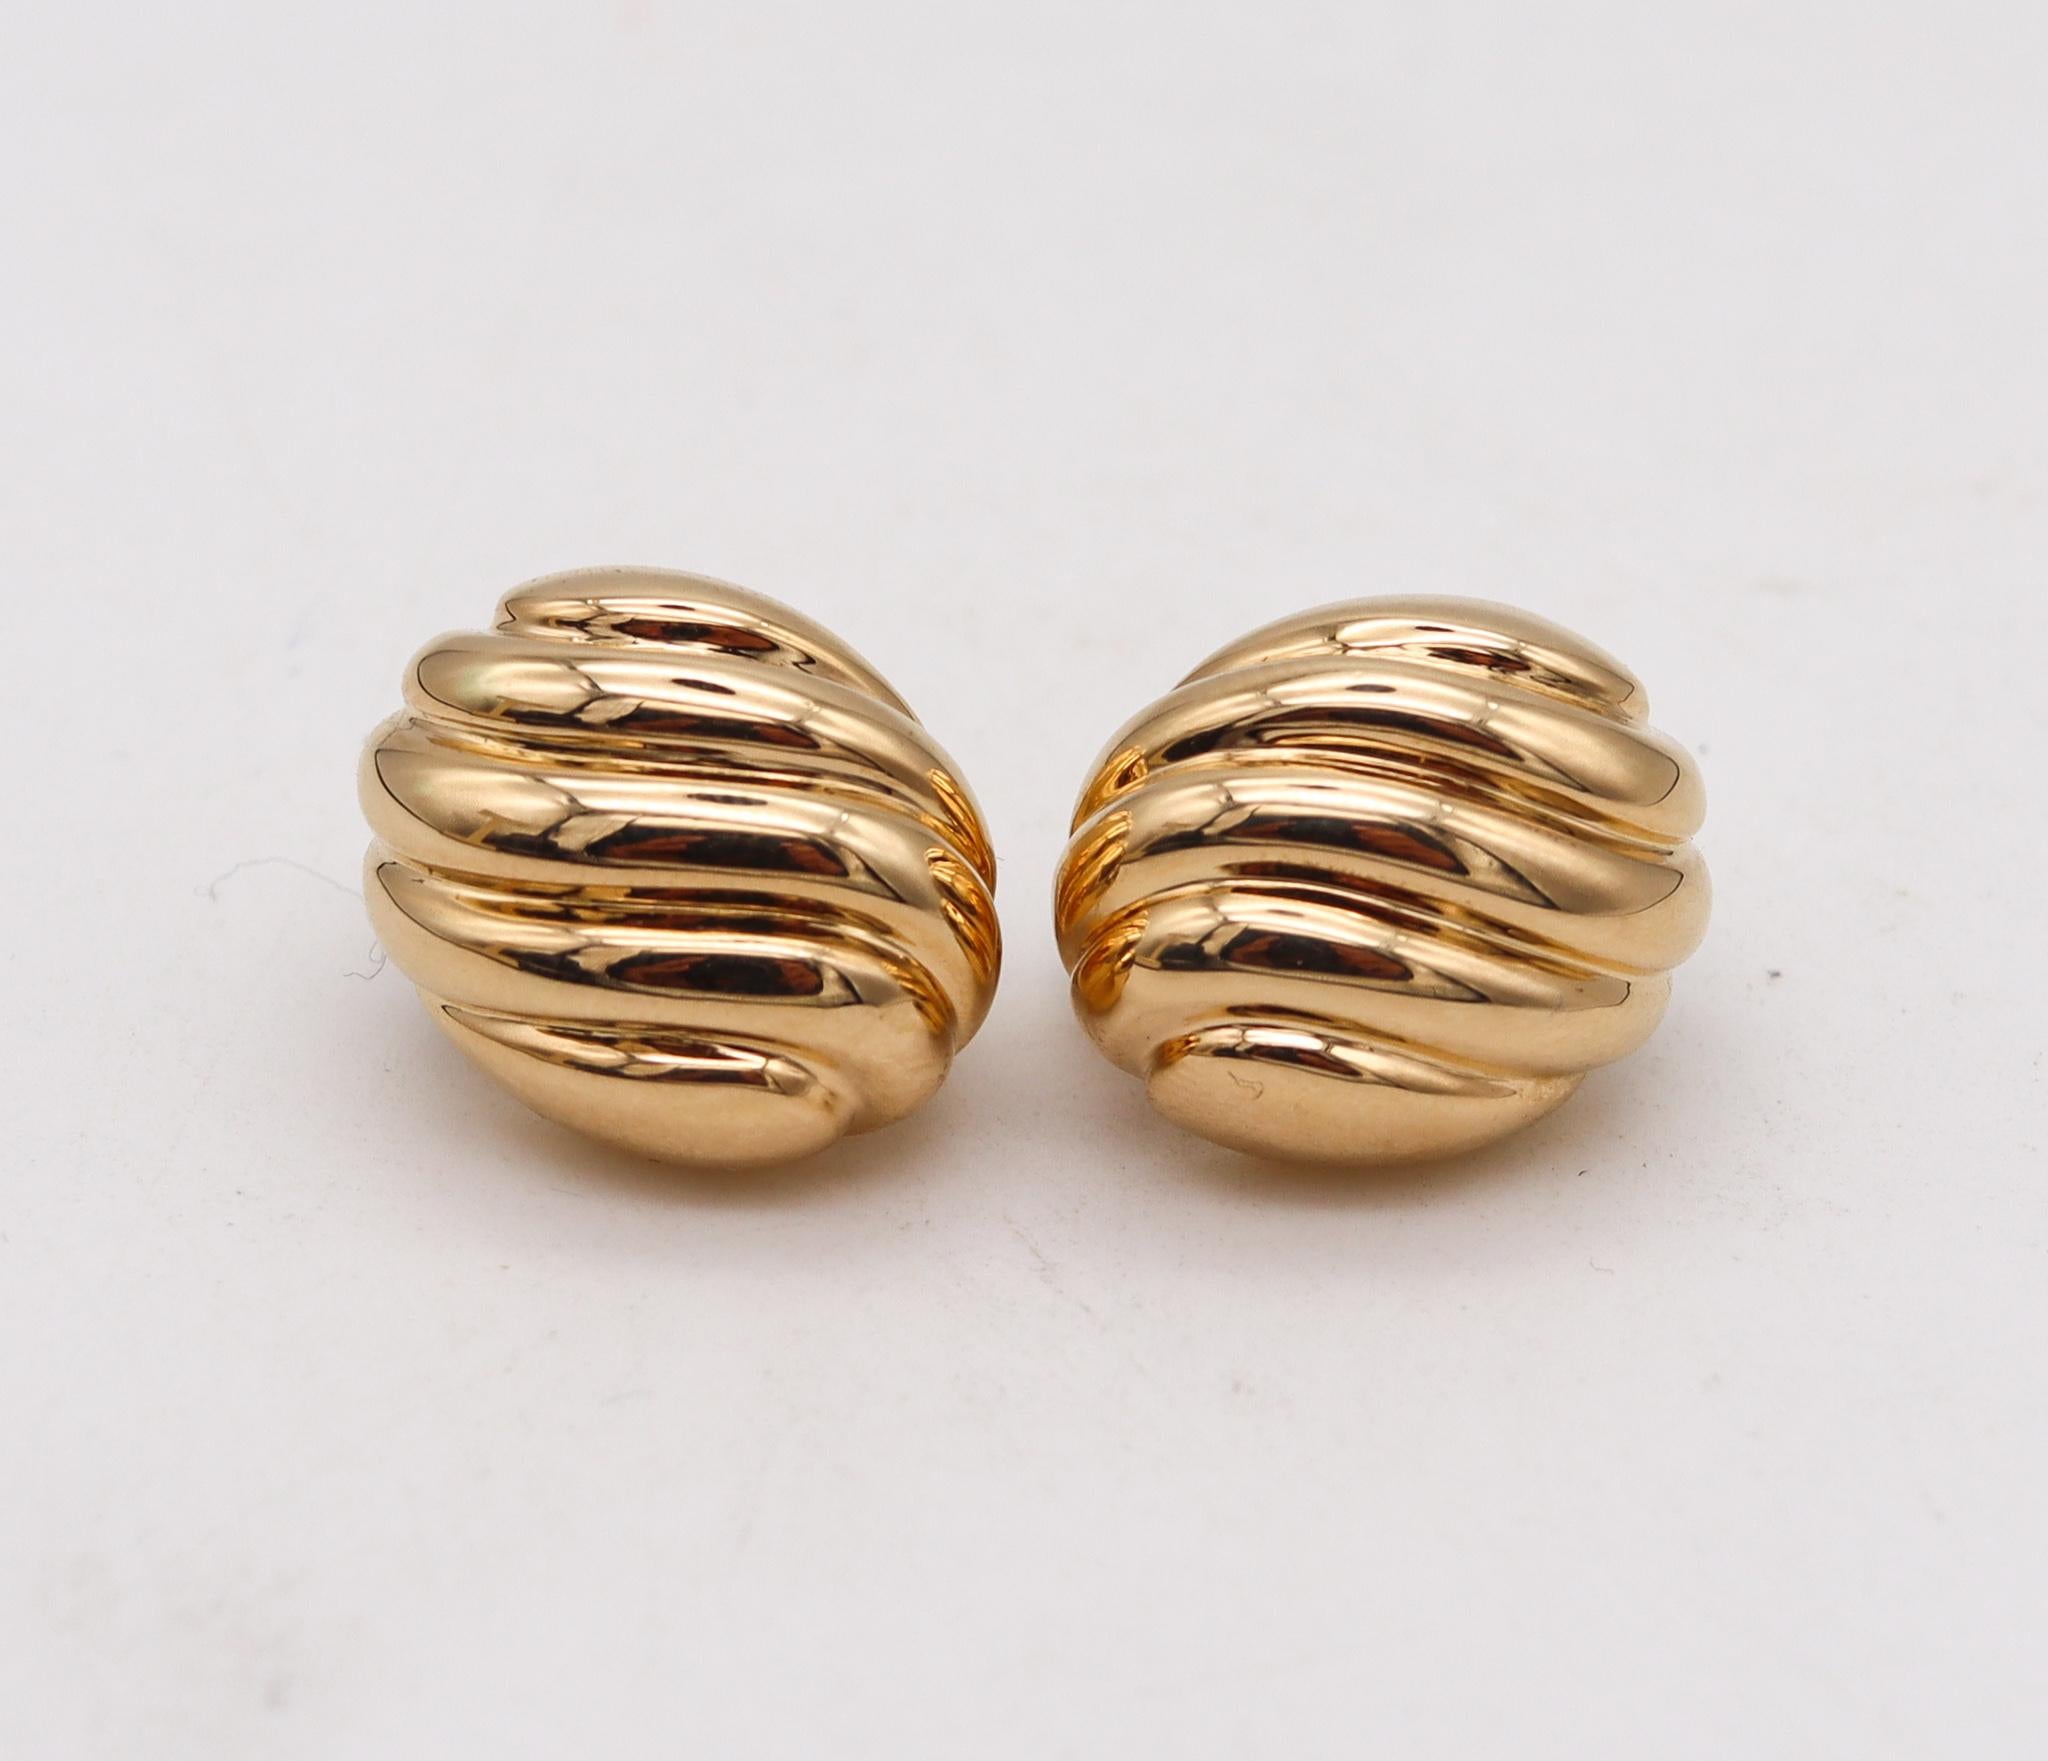 Clips earrings designed by Cartier.

Classic oval bombe pair, created in Paris France by the iconic jewelry house of Cartier, back in the late 1970's, These very chic pair of clips-earrings, has been carefully crafted with wavy patterns in solid